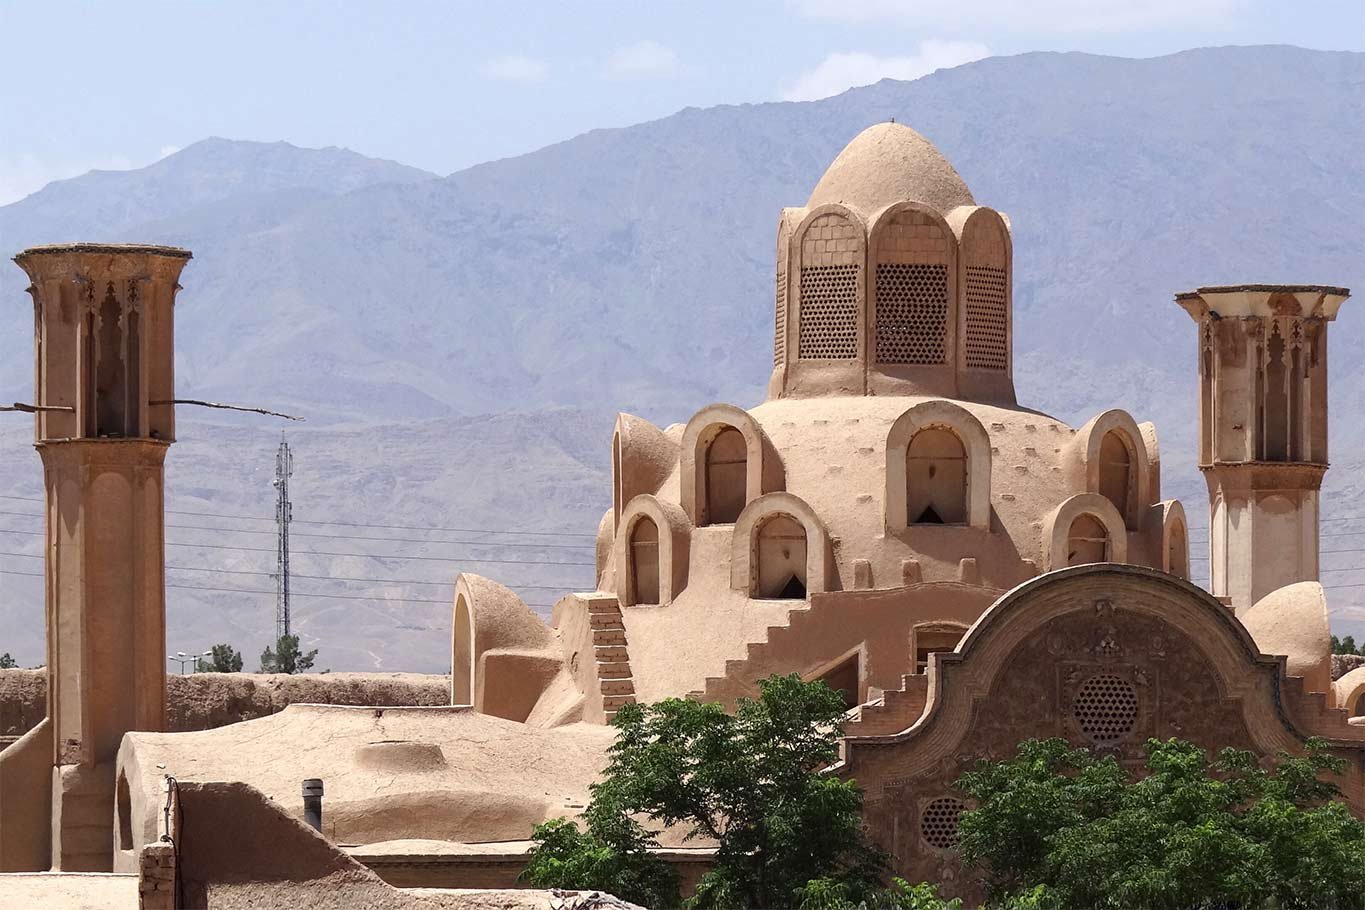 Borujerdi House, In Kashan, Central Iran. Built In , It Is An Excellent Example Of Ancient Persian Desert Architecture. The Two Tall Windcatchers Cool The Andaruni (Courtyard) Of The House.